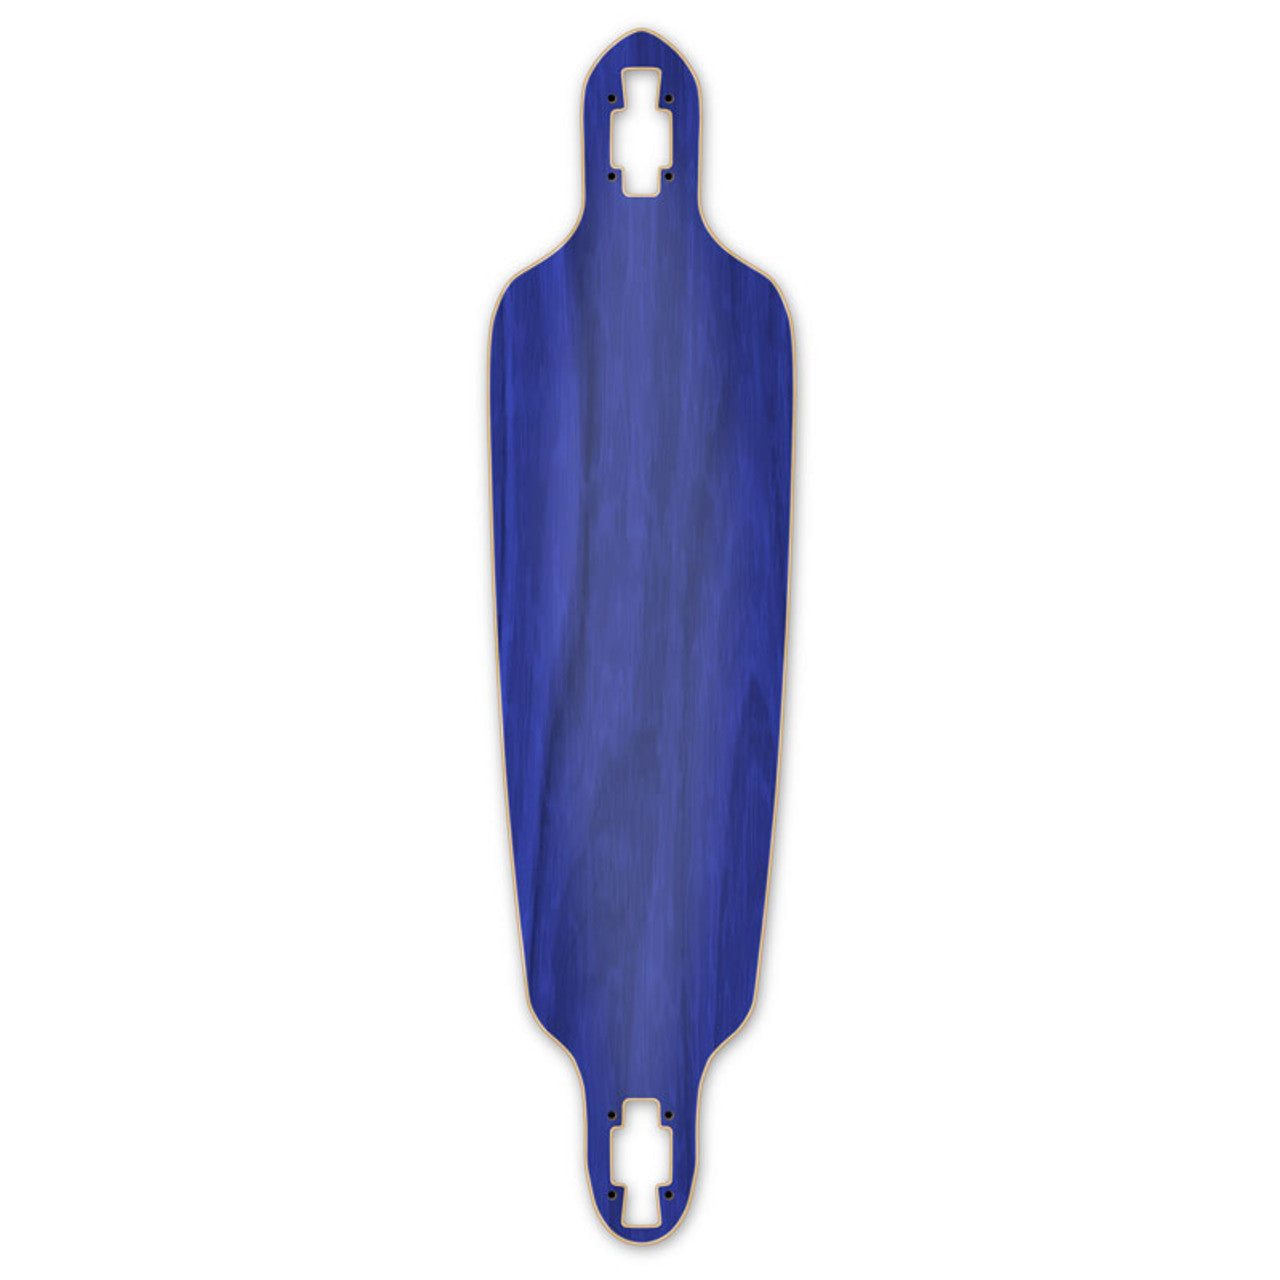 Yocaher Drop Through Longboard Deck - Stained Blue